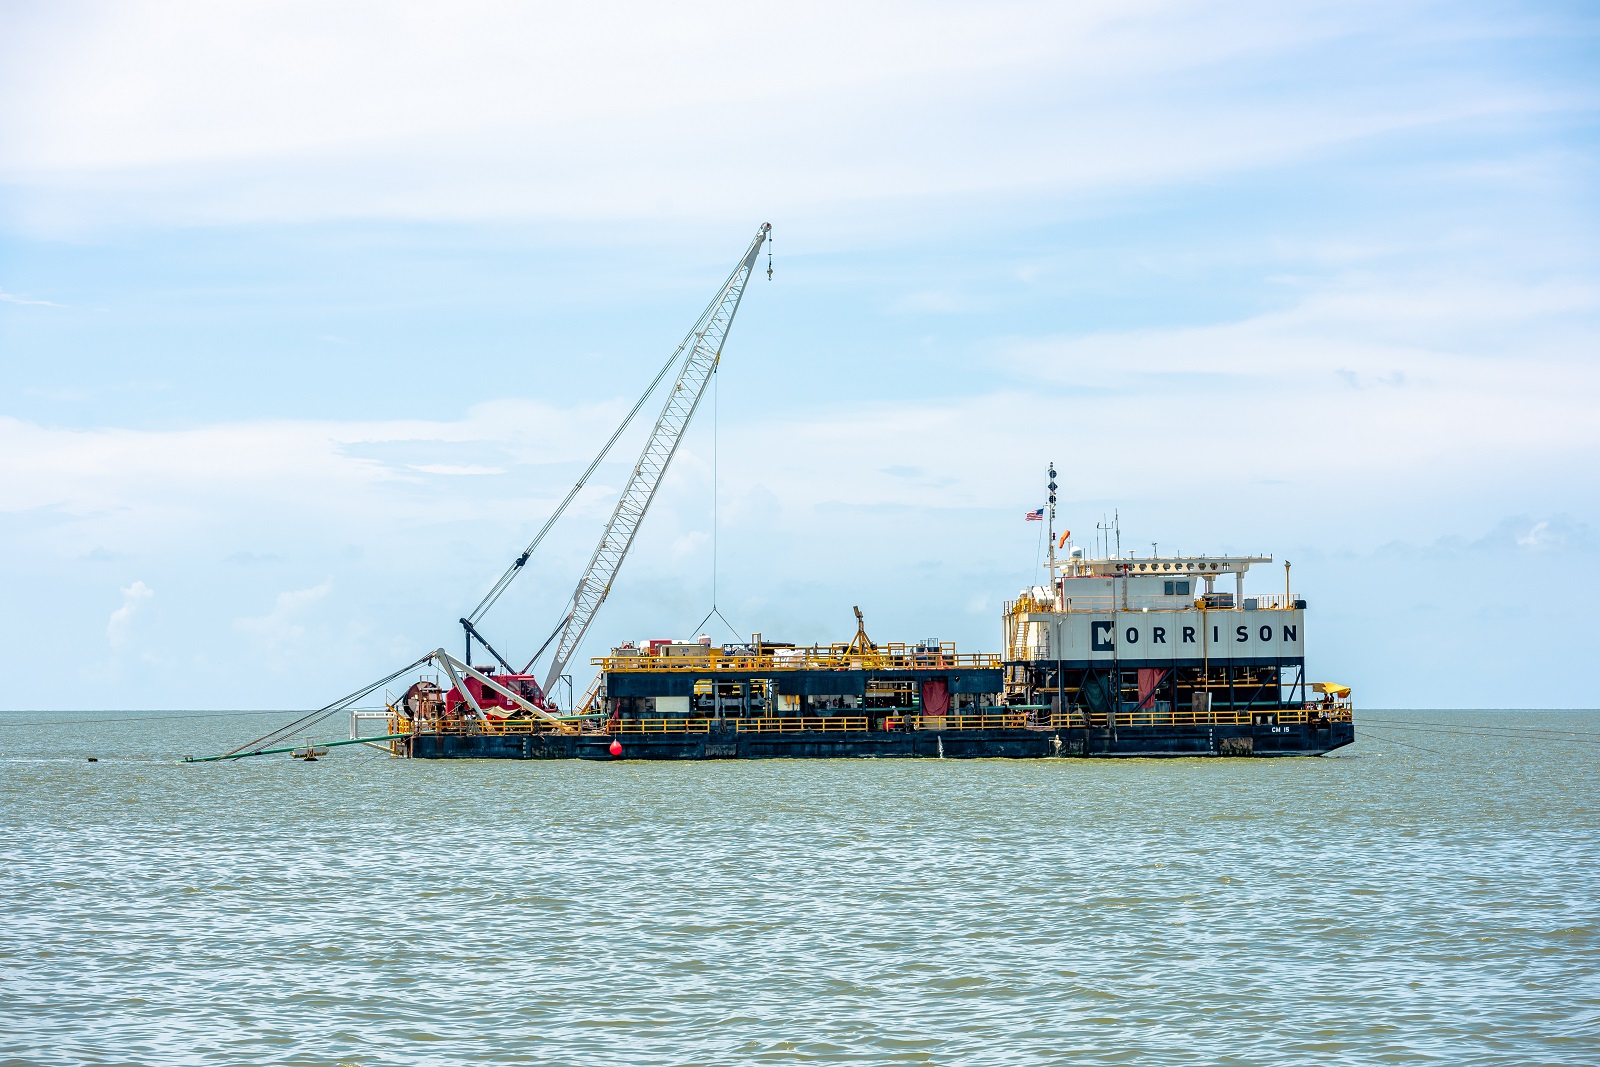 Morrison Successfully Completes Pipeline Installation in Gulf of Mexico Shelf, Achieving Milestone